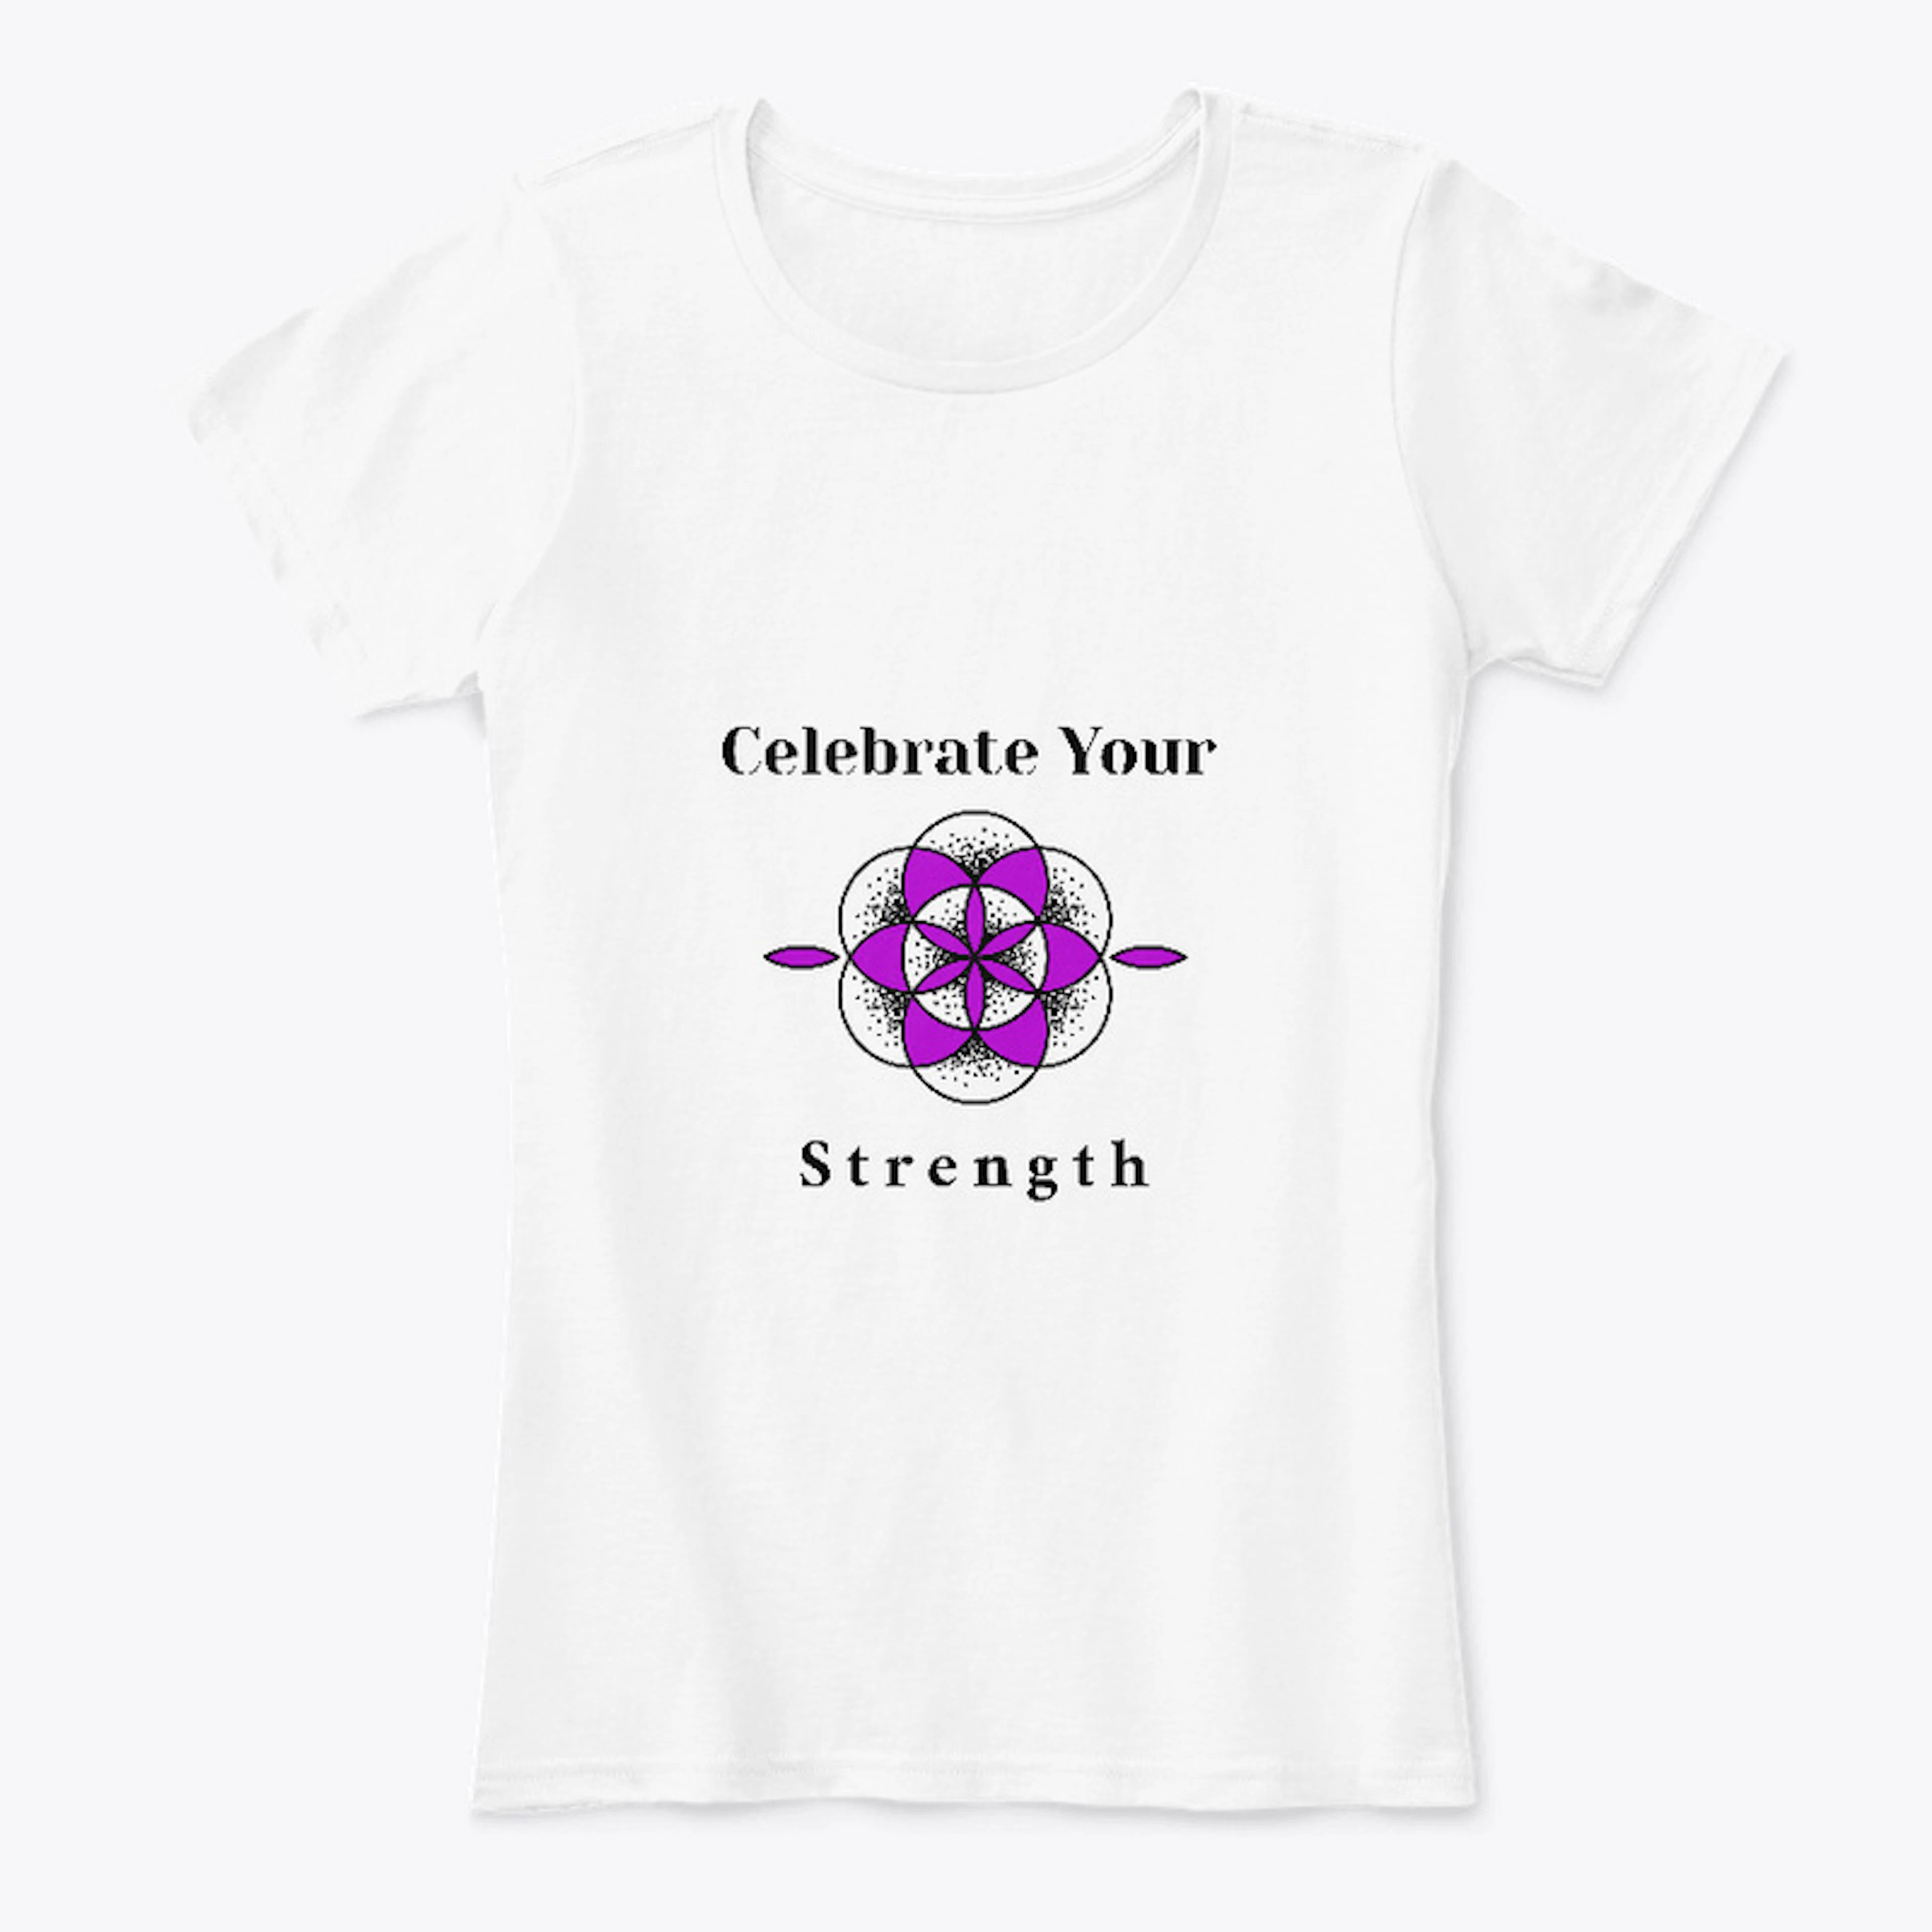 Celebrate Your Strength T-Shirt and Gear